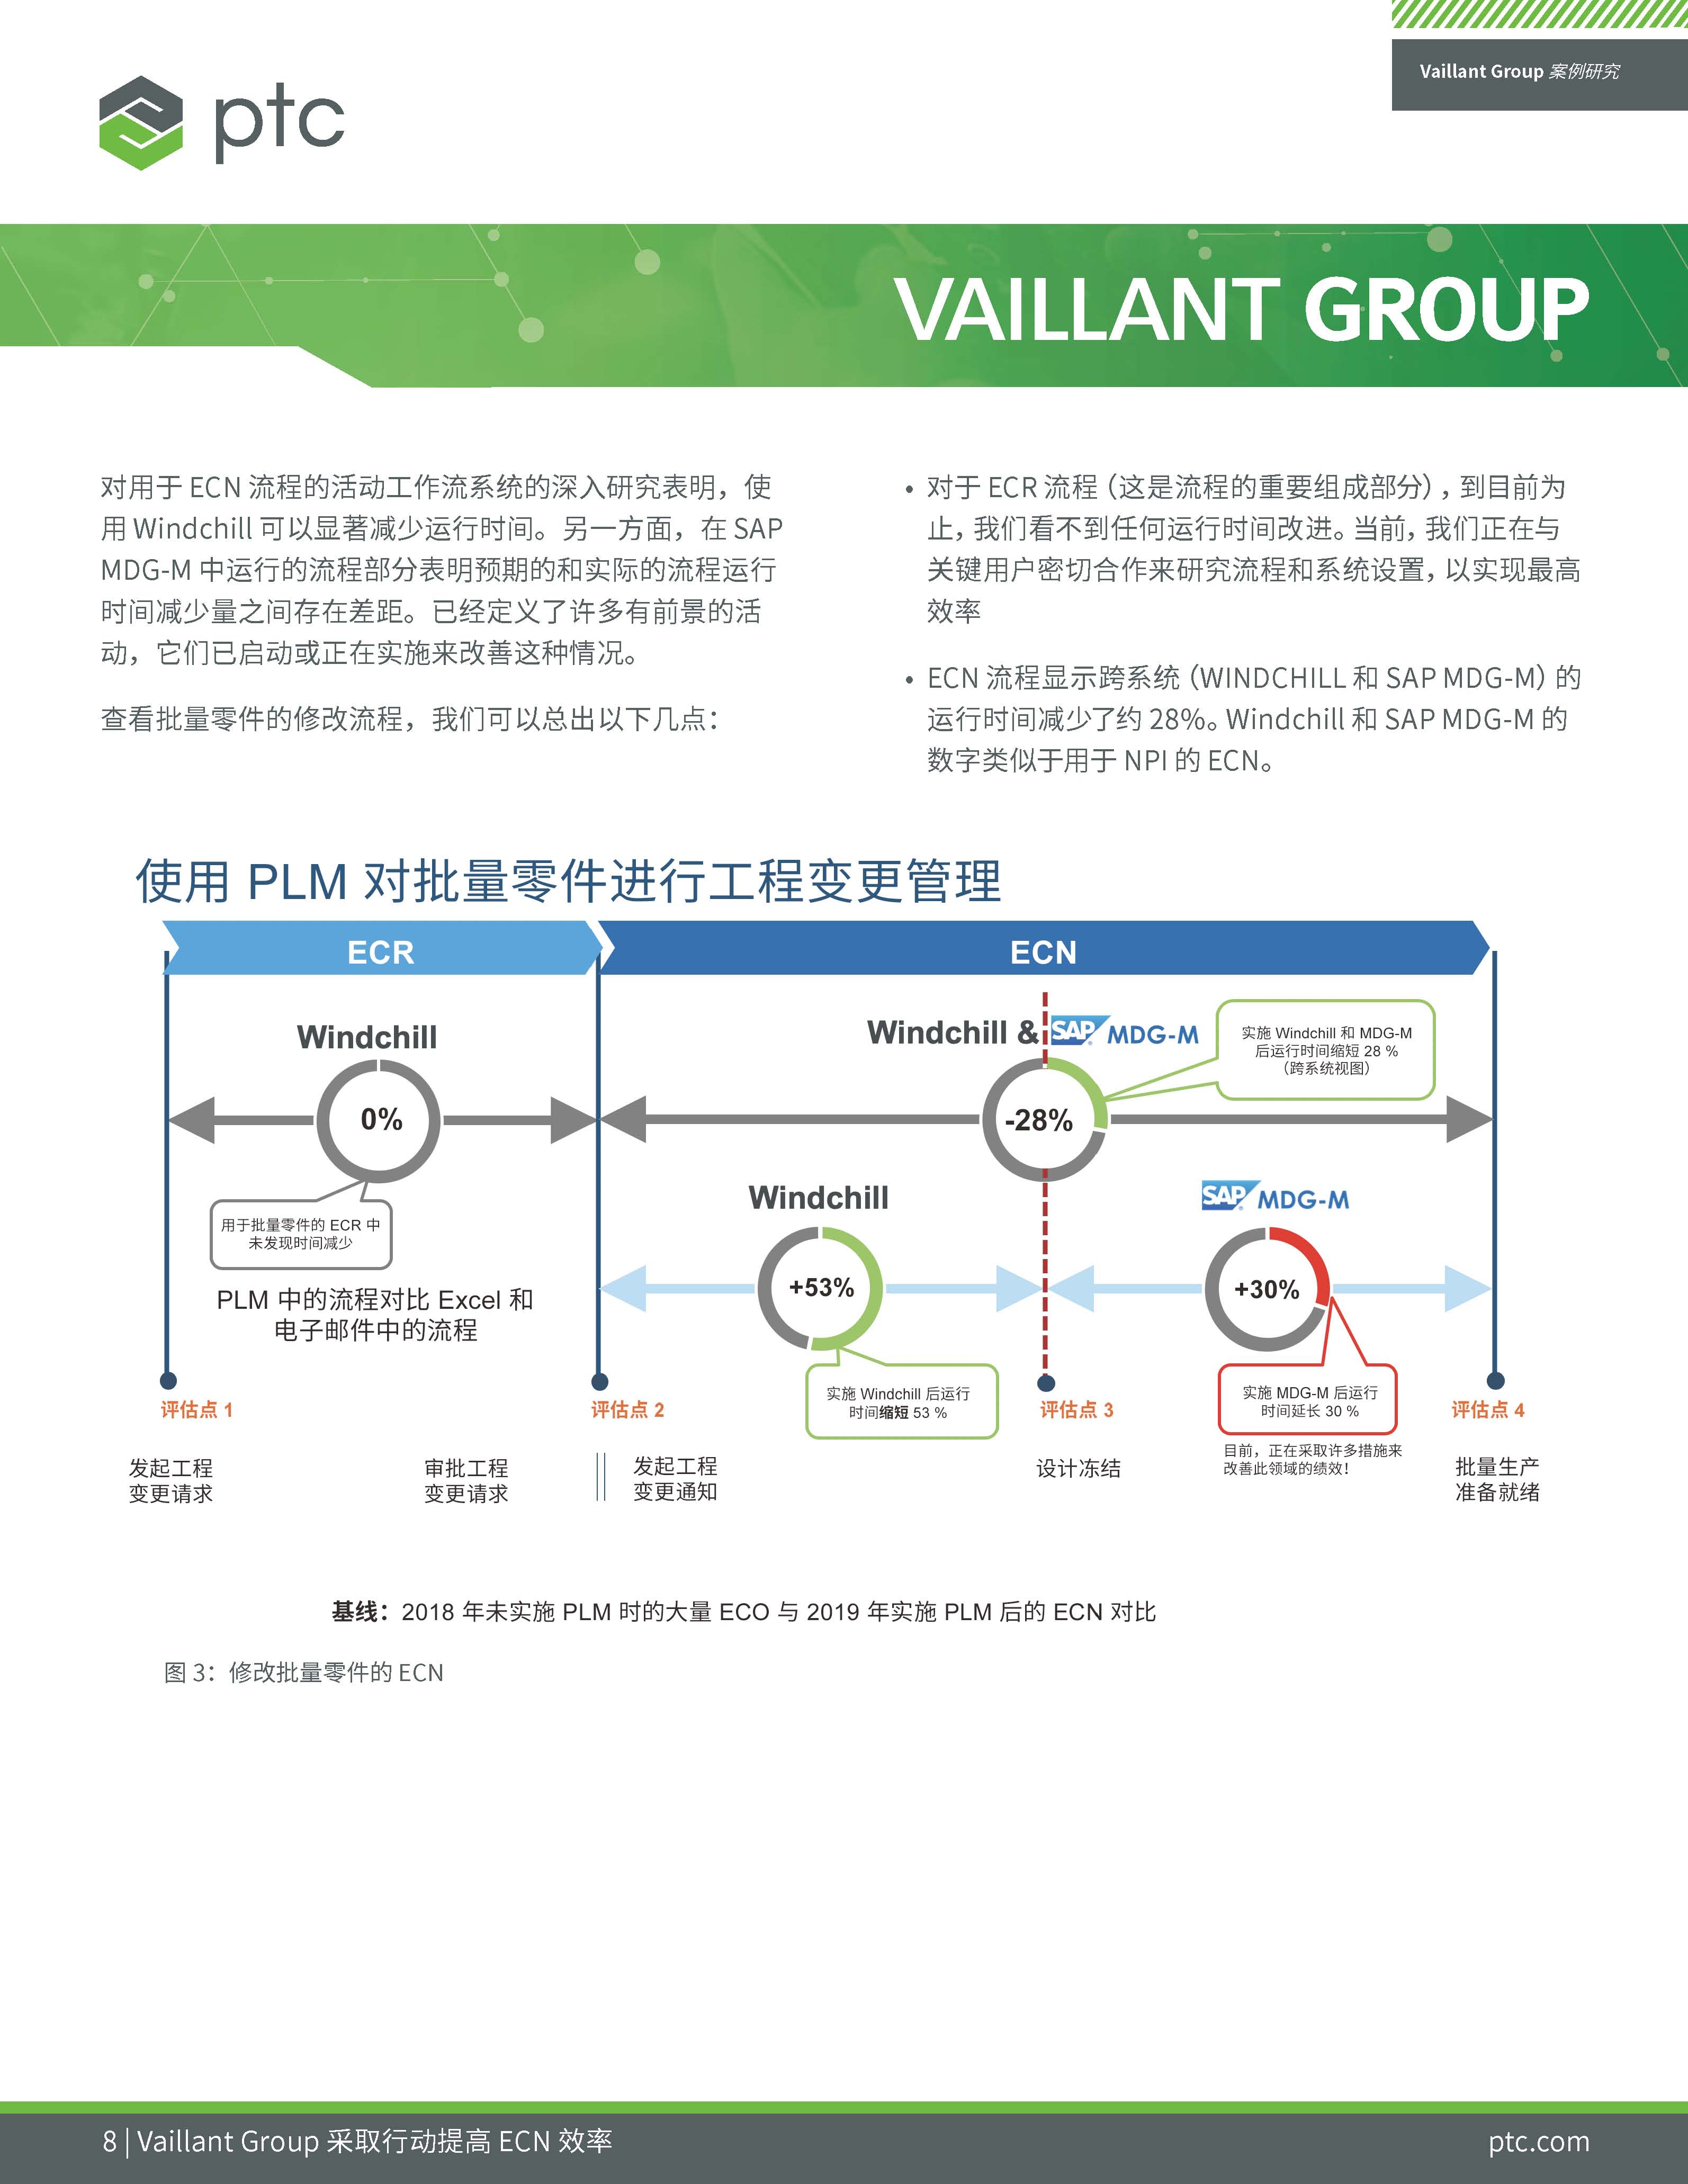 Vaillant Group's Digital Transformation (Chinese)_页面_08.jpg